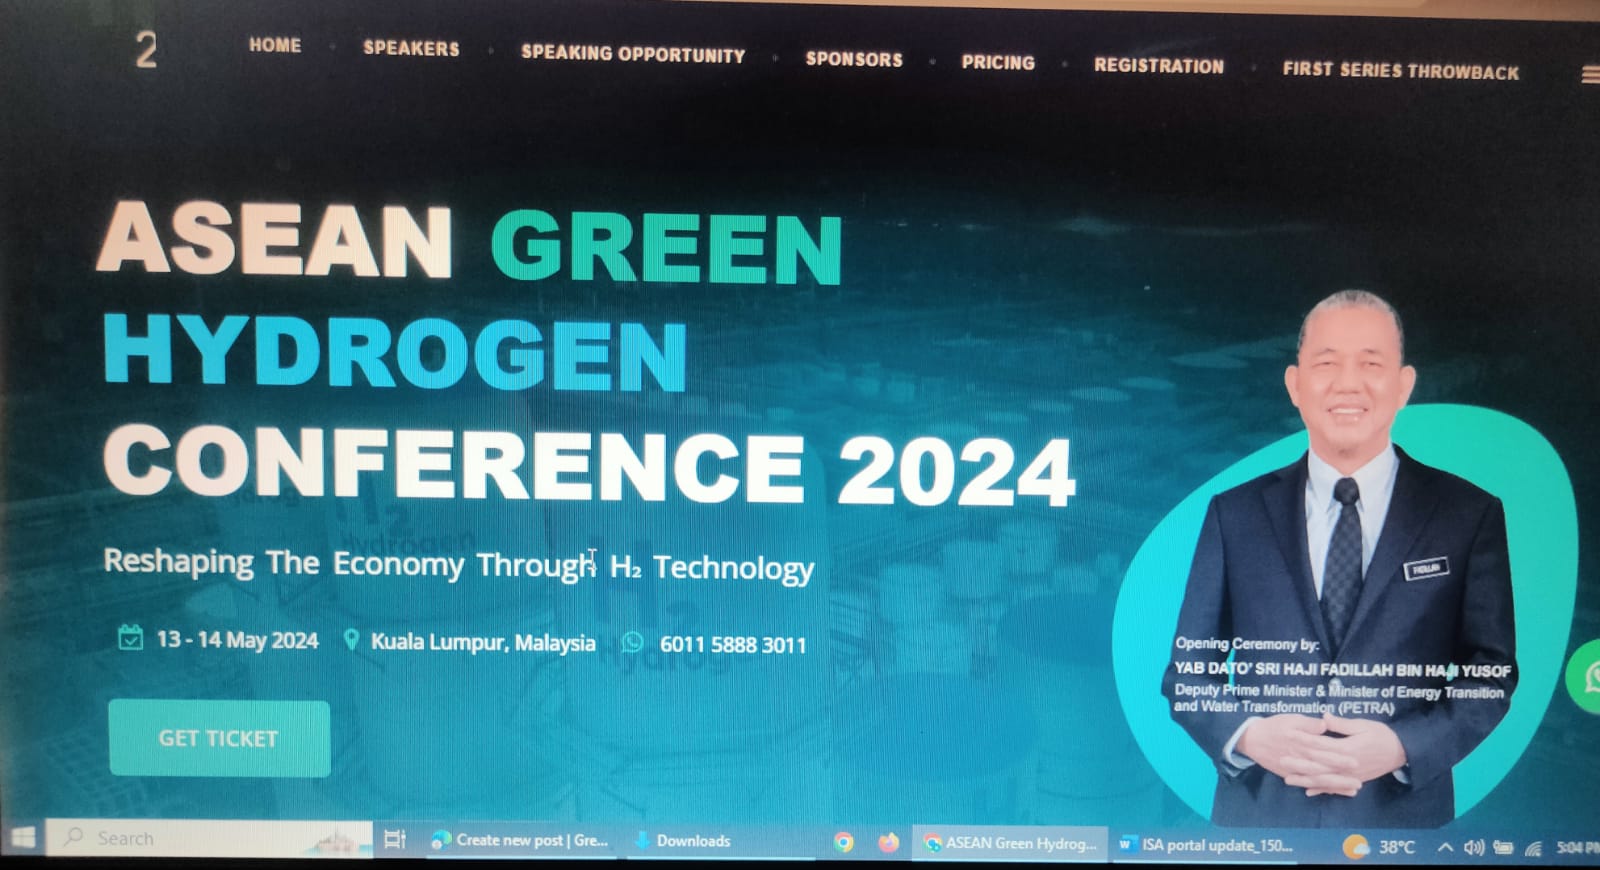 ASEAN GREEN HYDROGEN CONFERENCE 2024